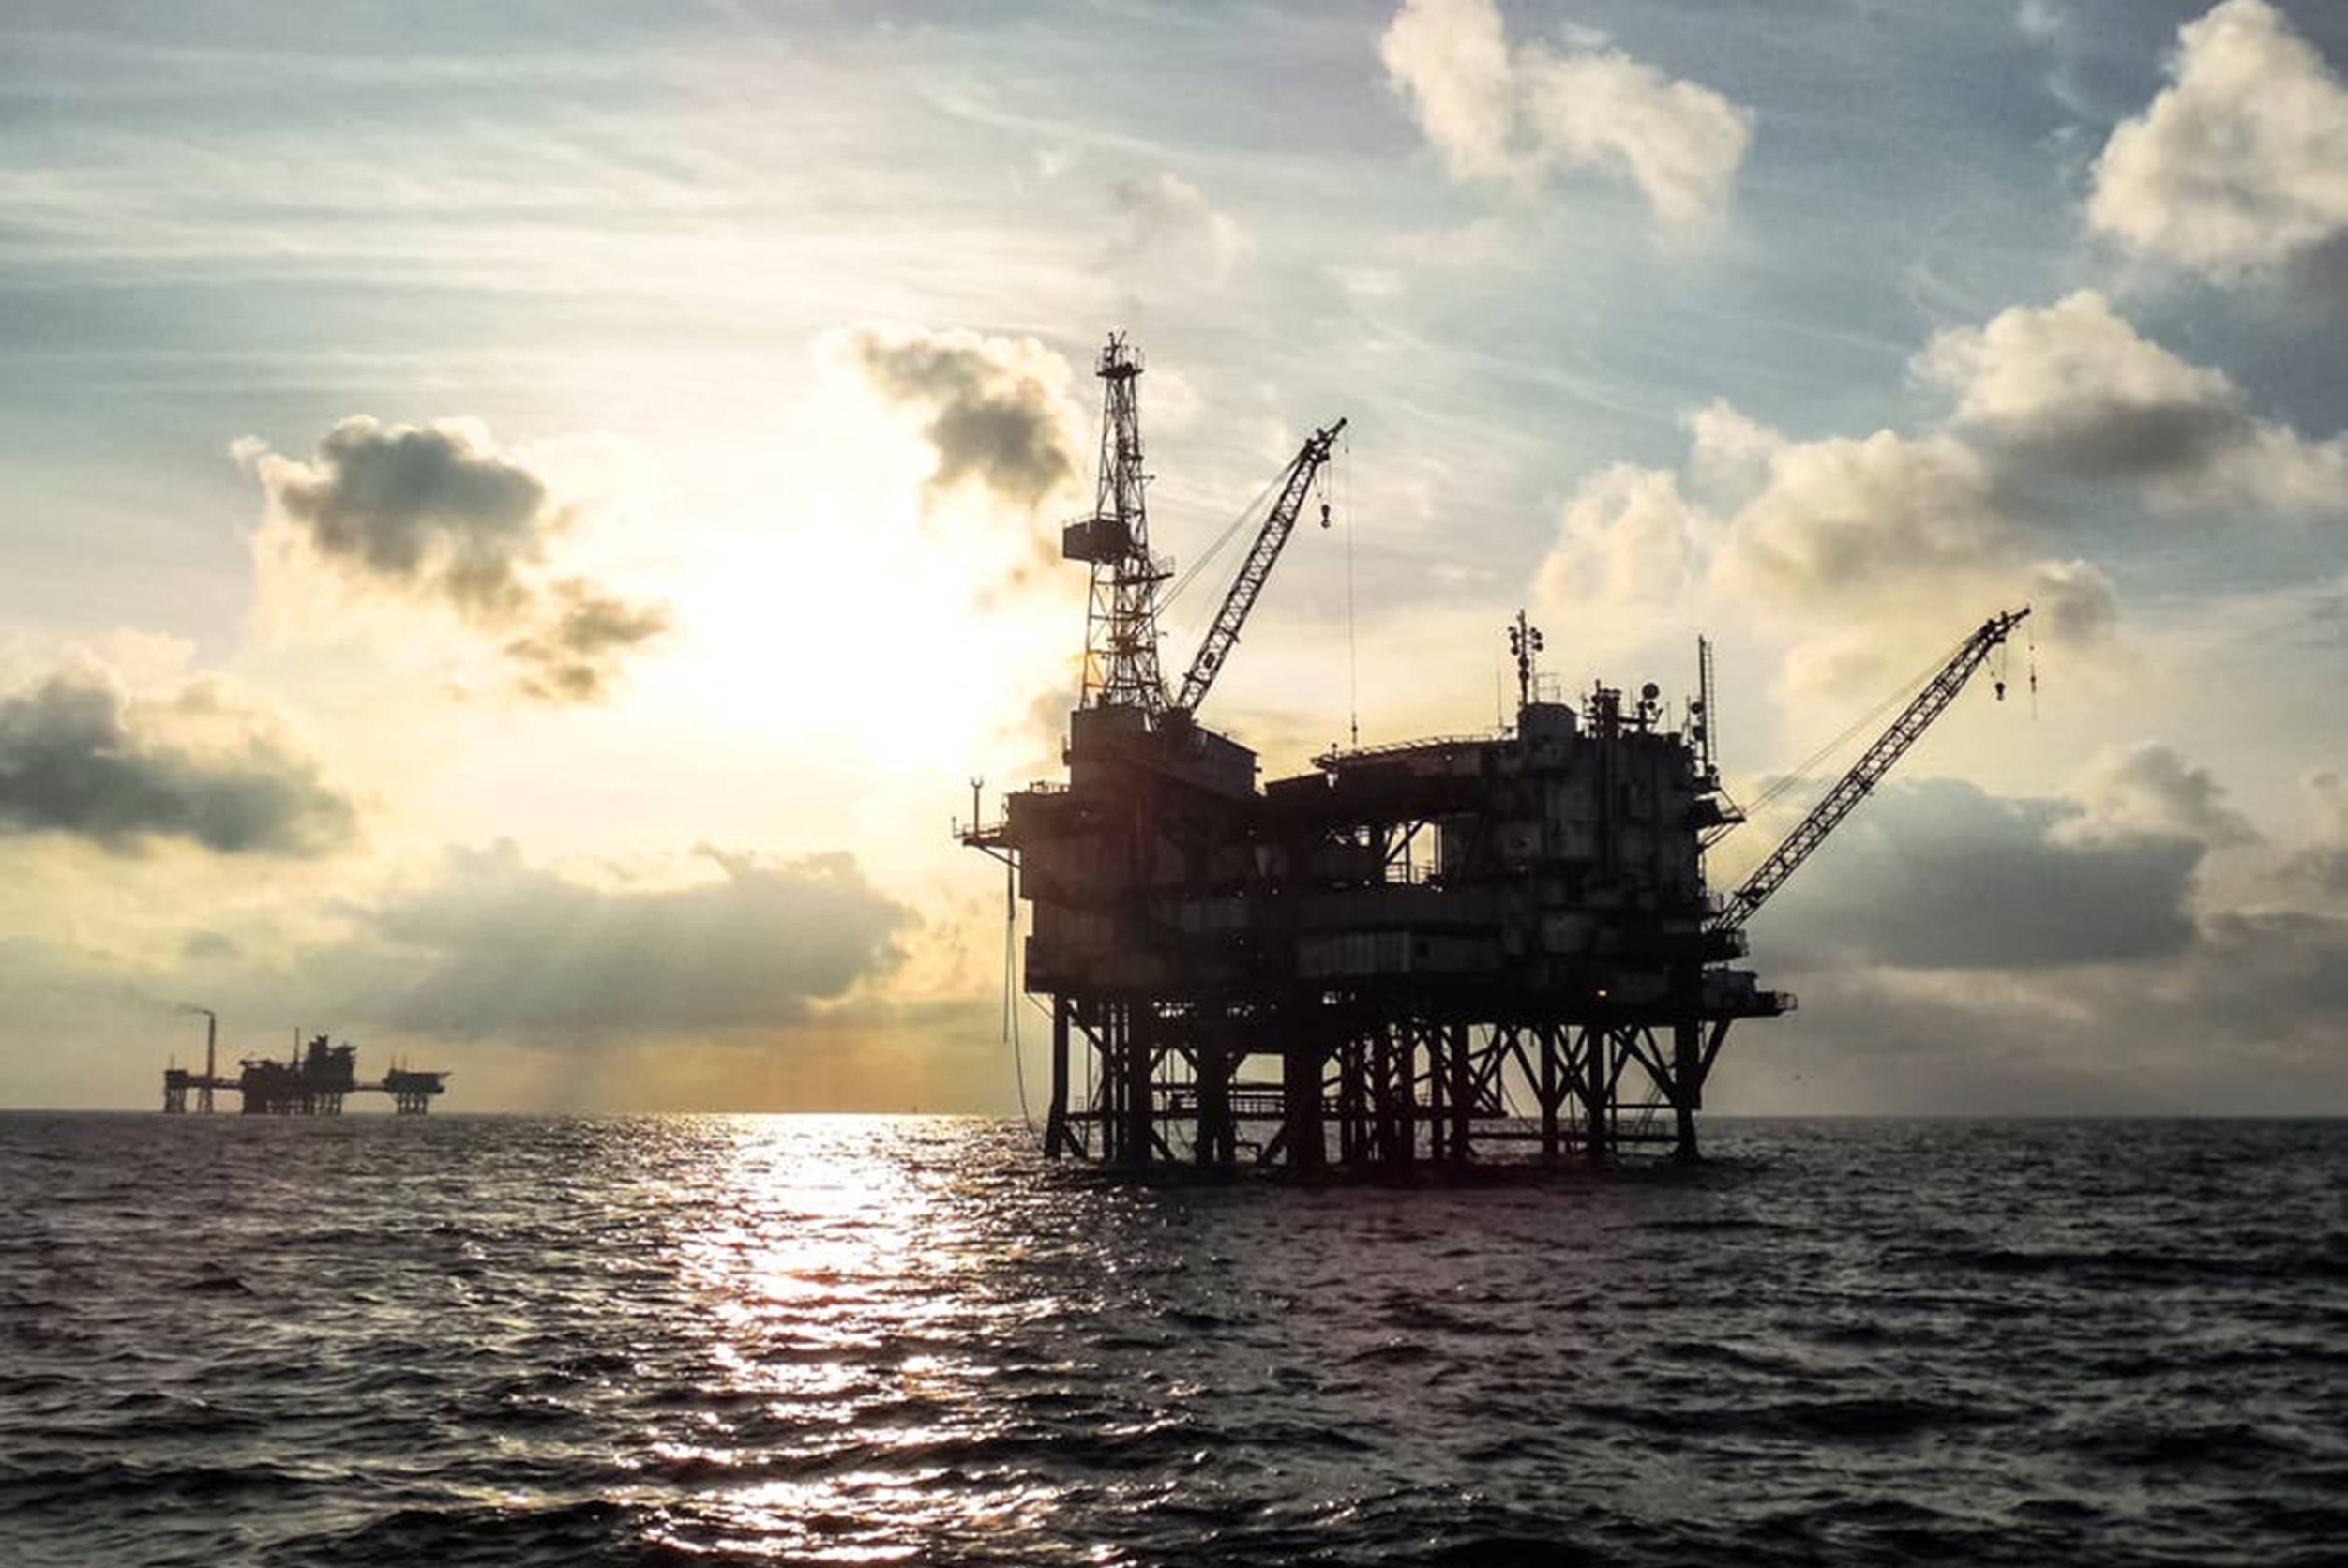 Oil and gas exploration on the rise in Africa